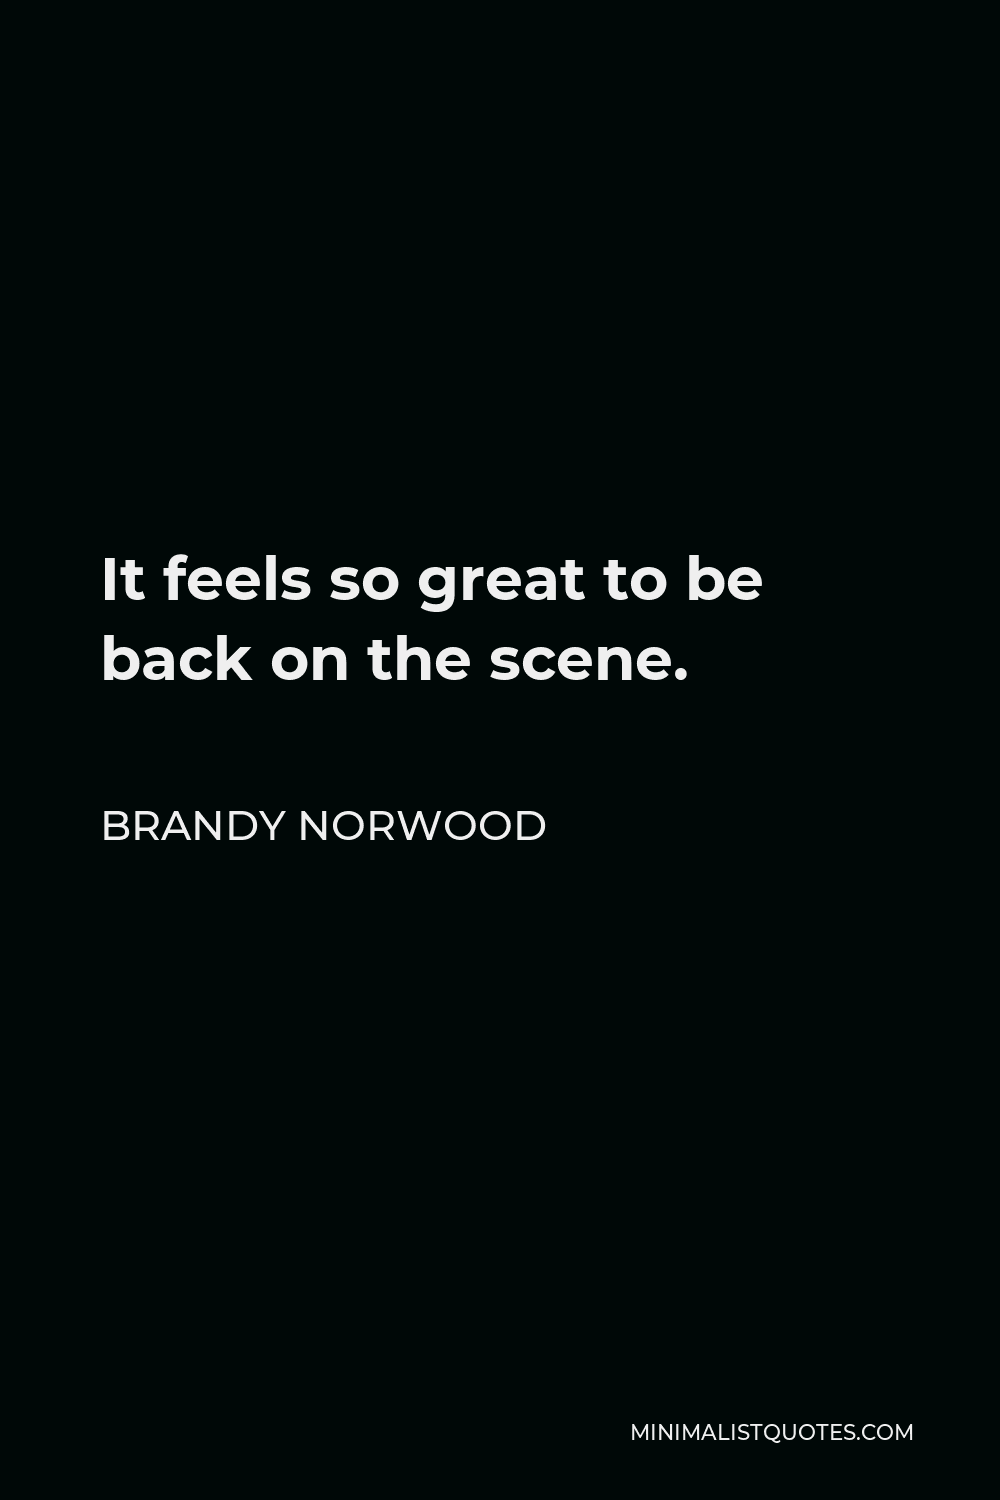 Brandy Norwood Quote - It feels so great to be back on the scene.